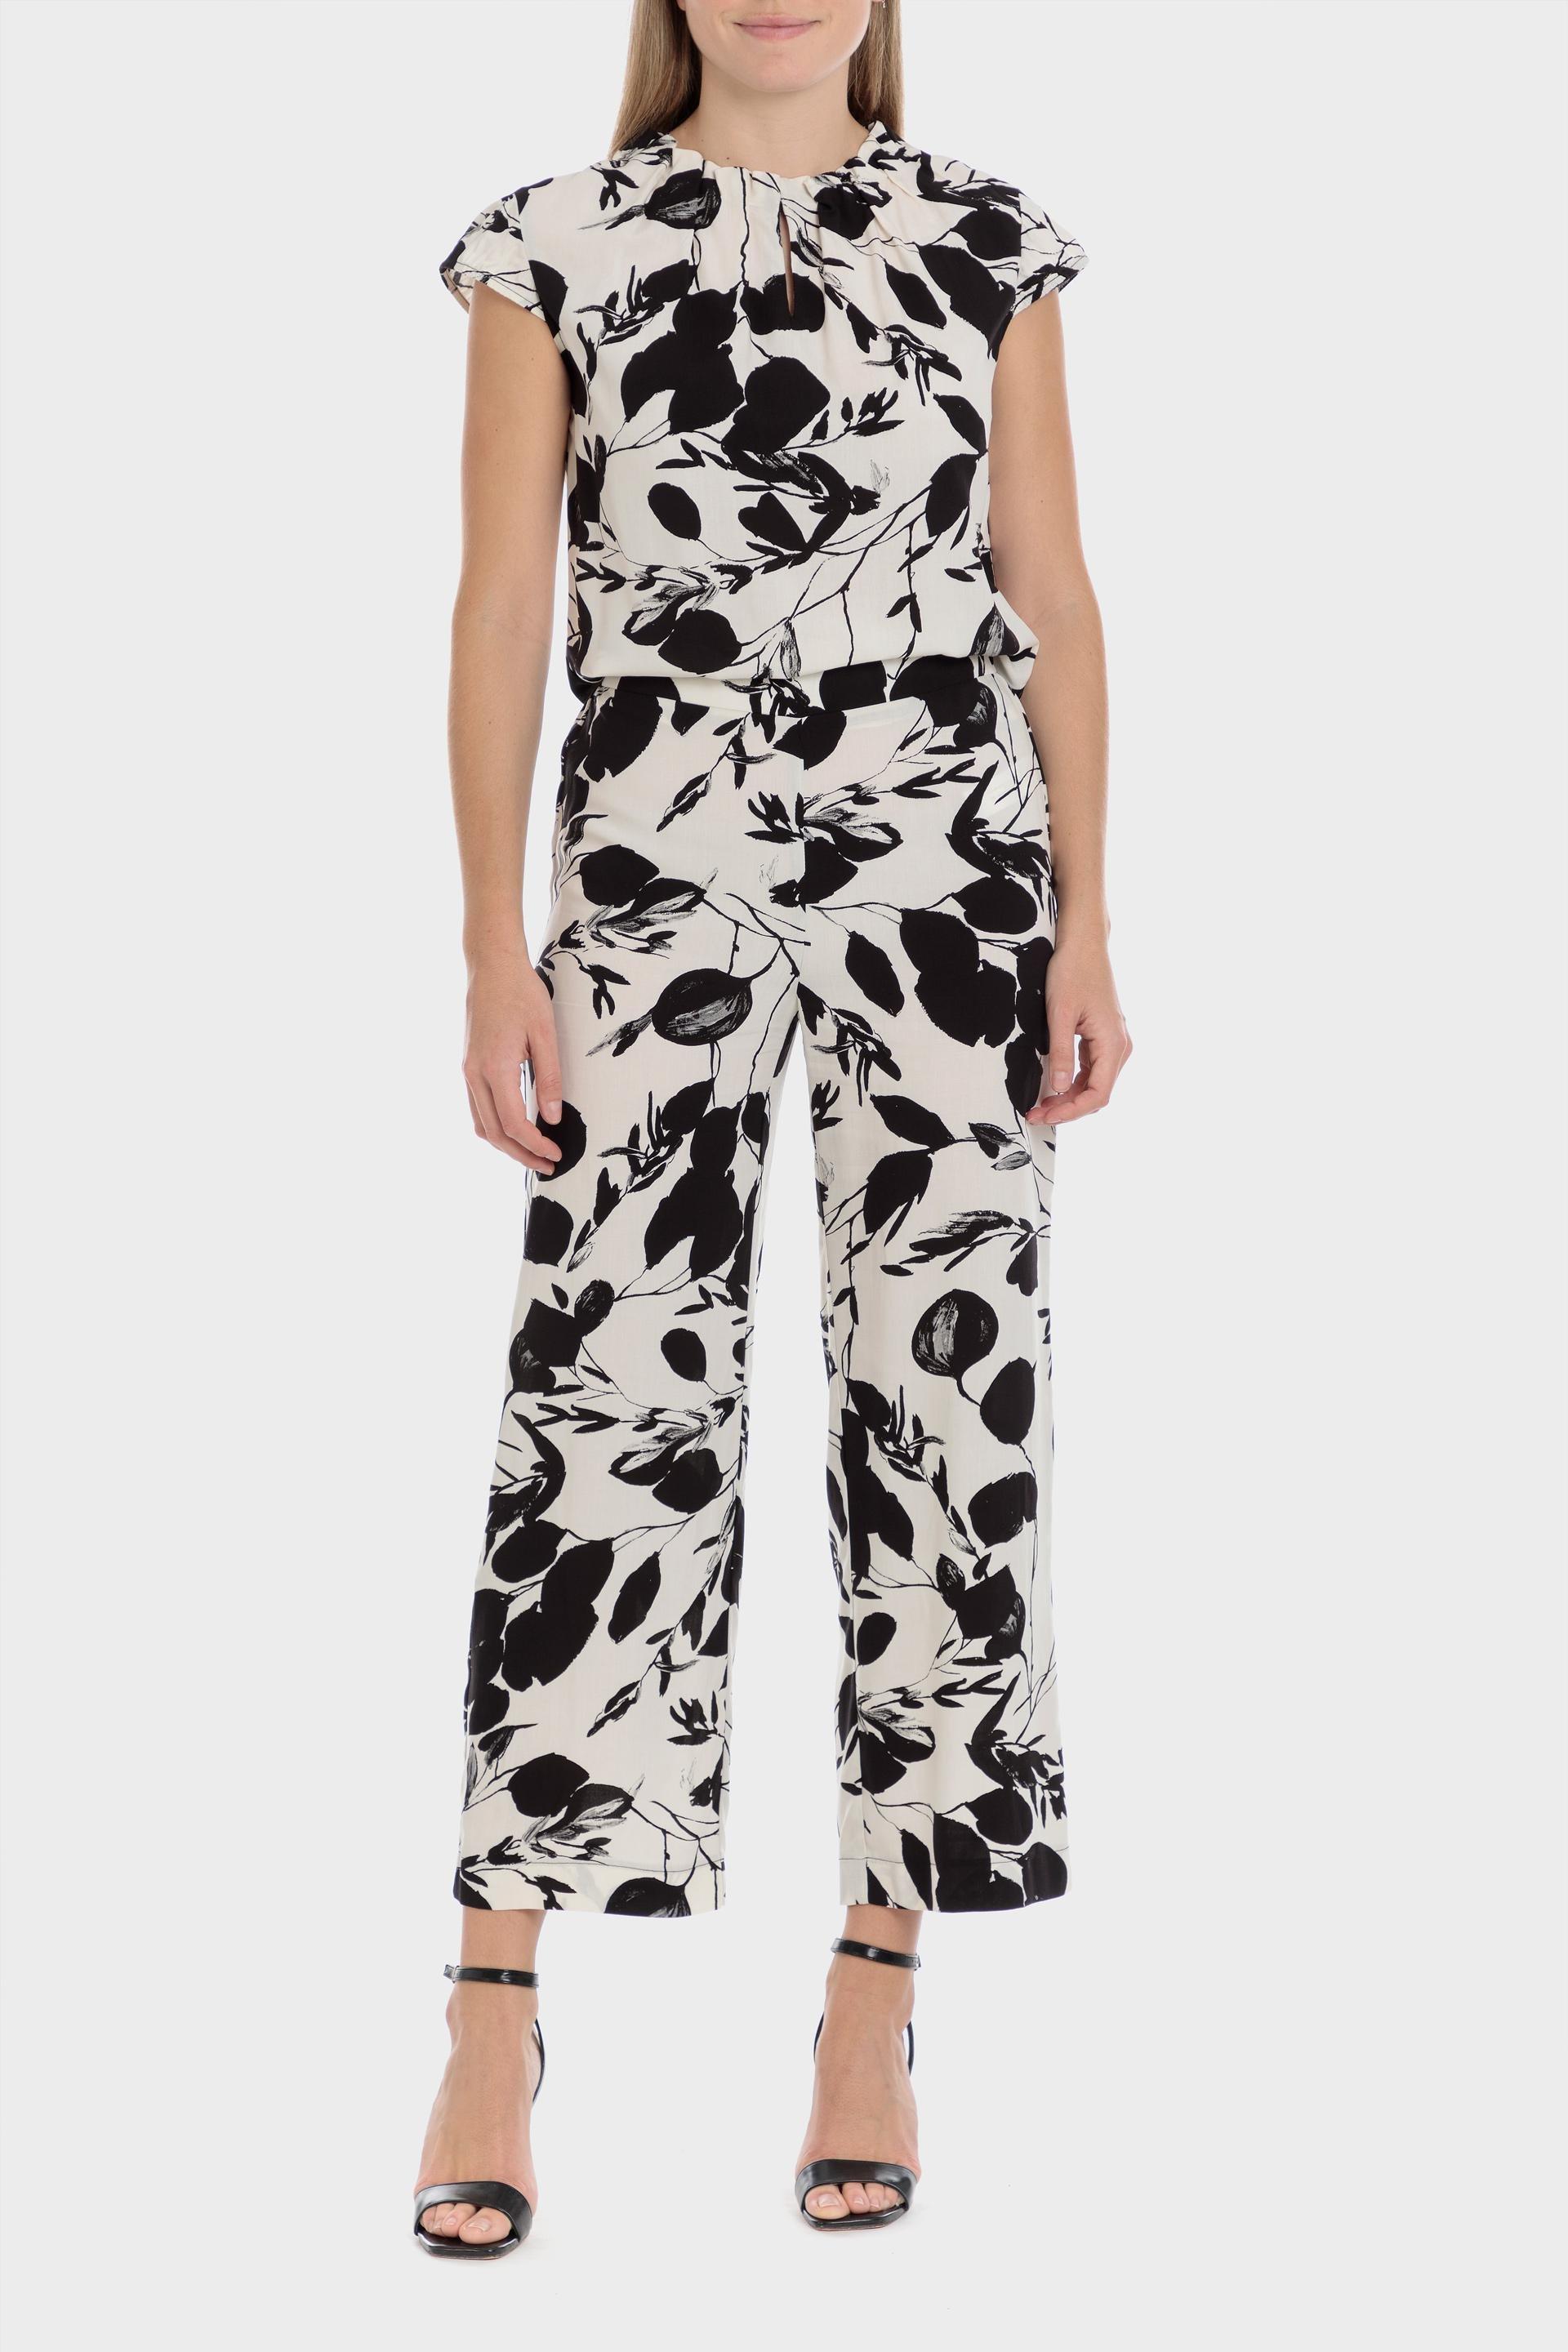 Punt Roma - Multicolour Printed Trousers